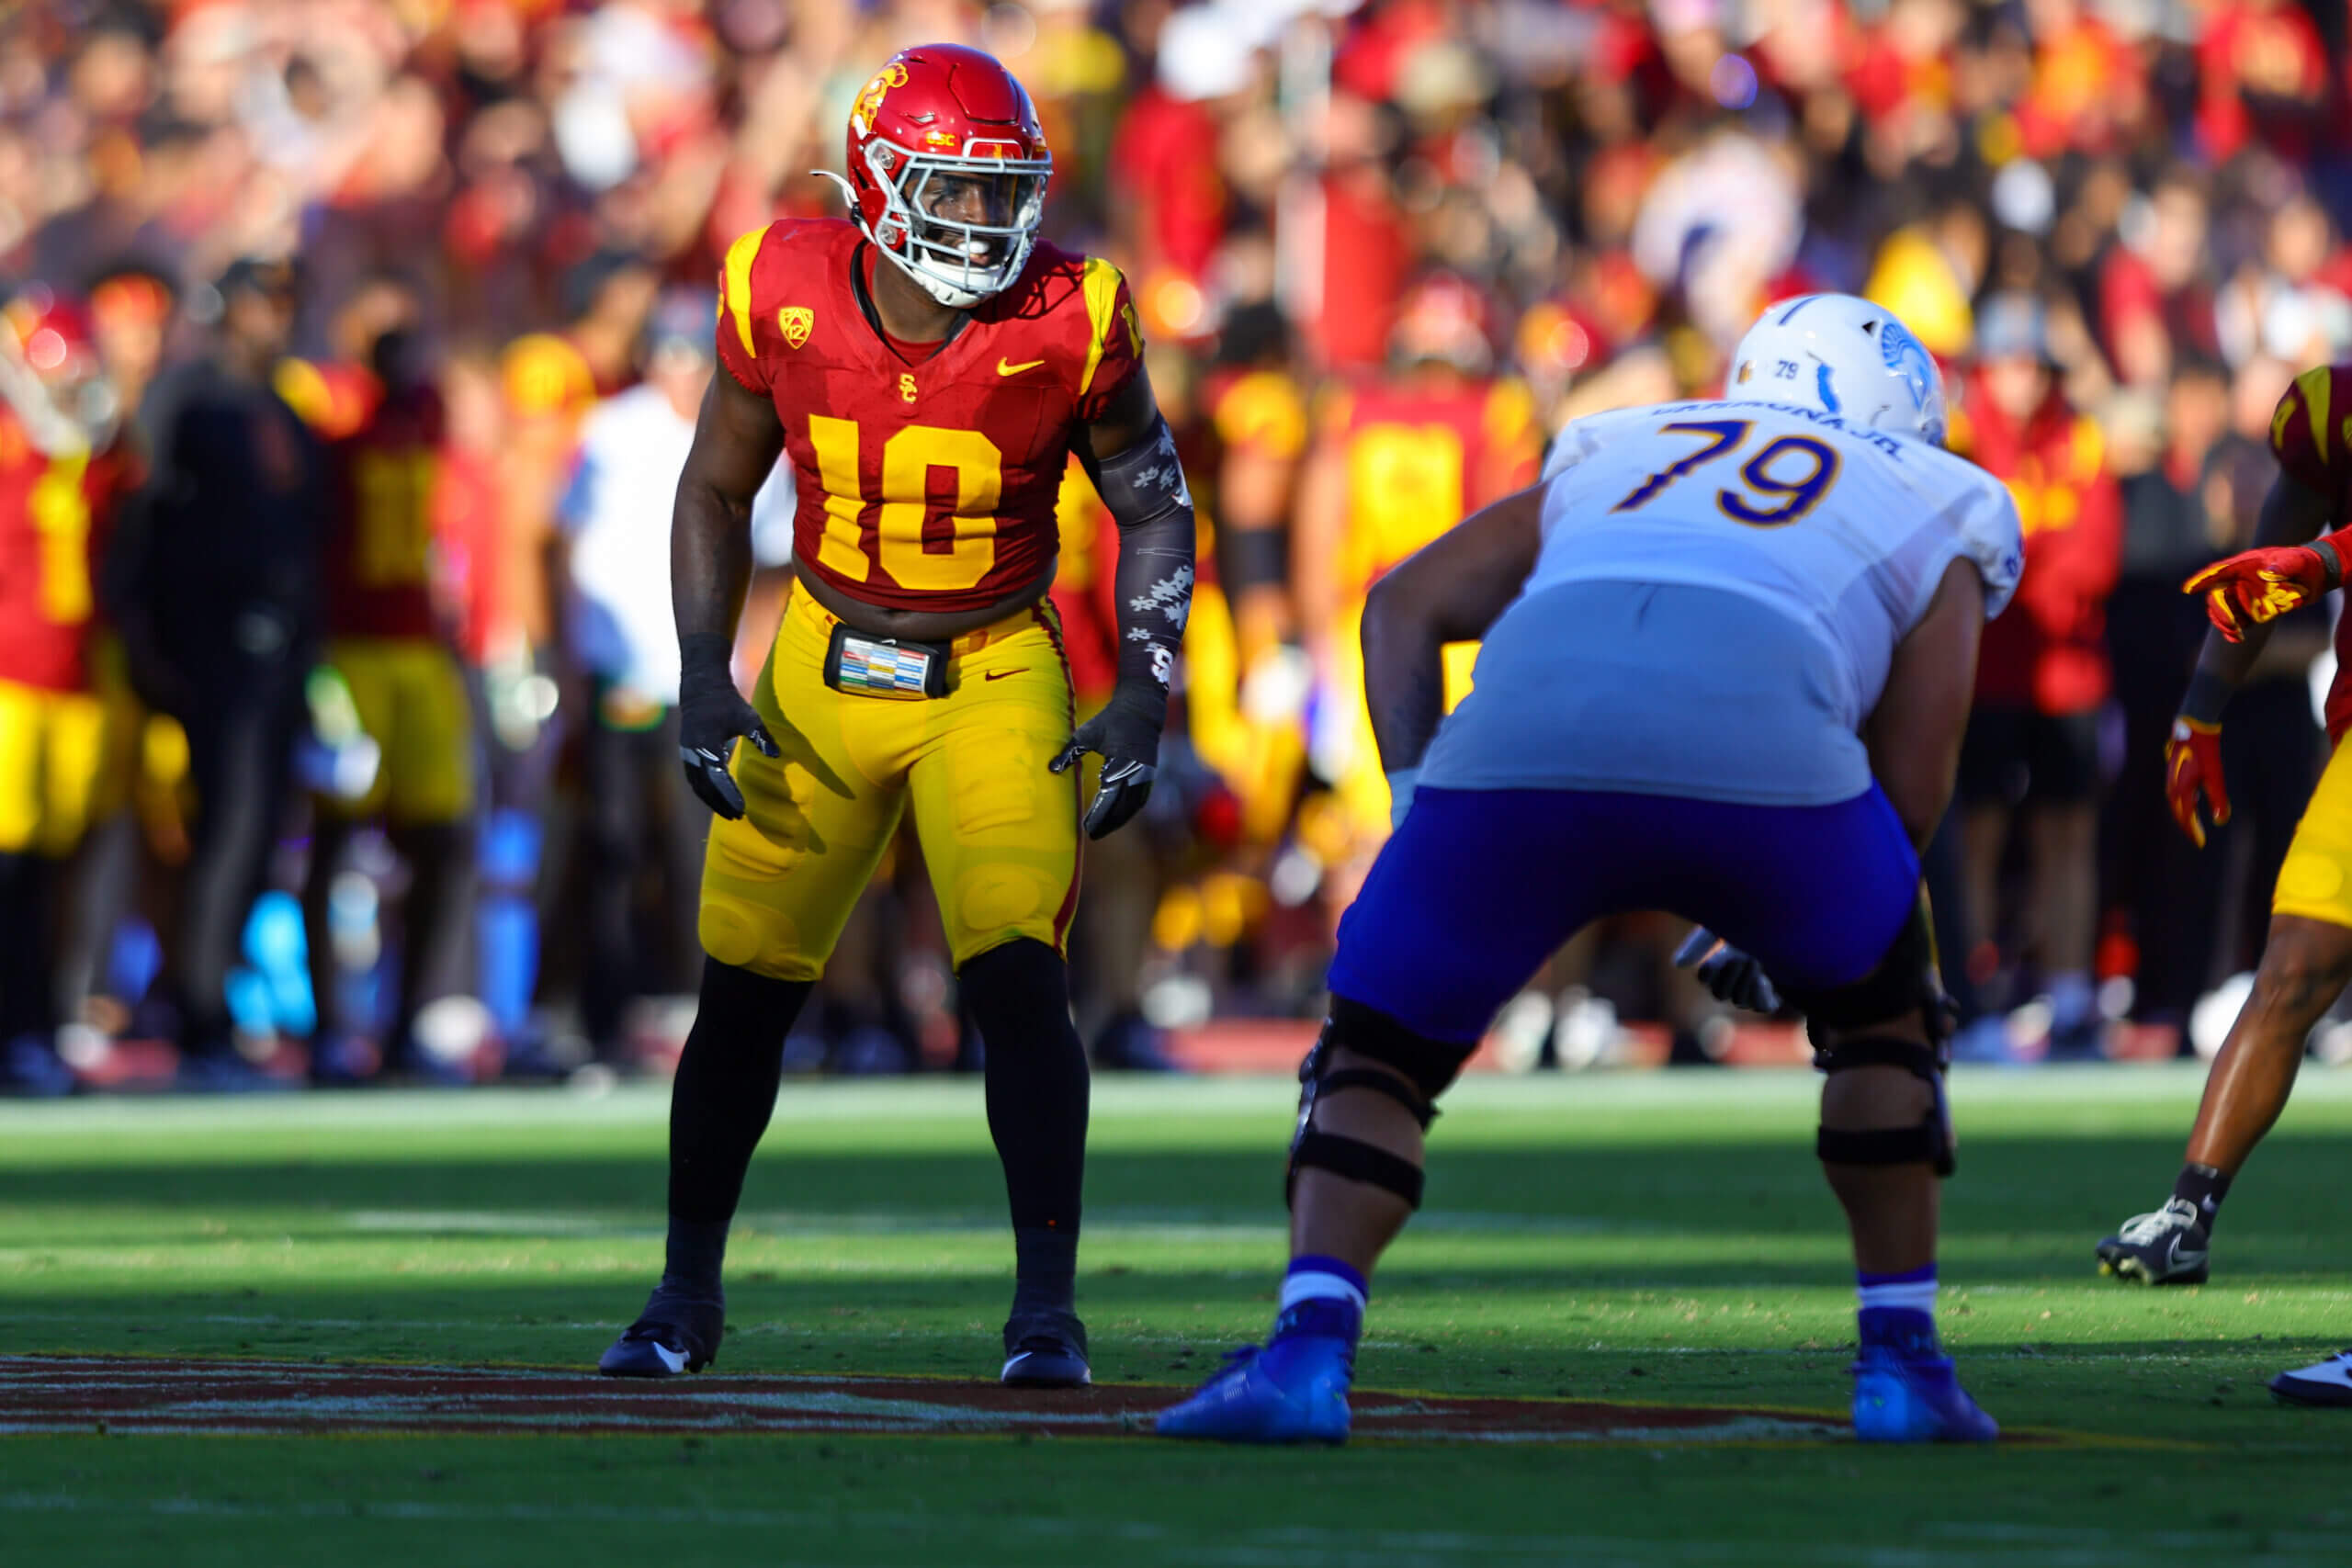 USC scholarship distribution: Where the Trojans stand after the first transfer portal window